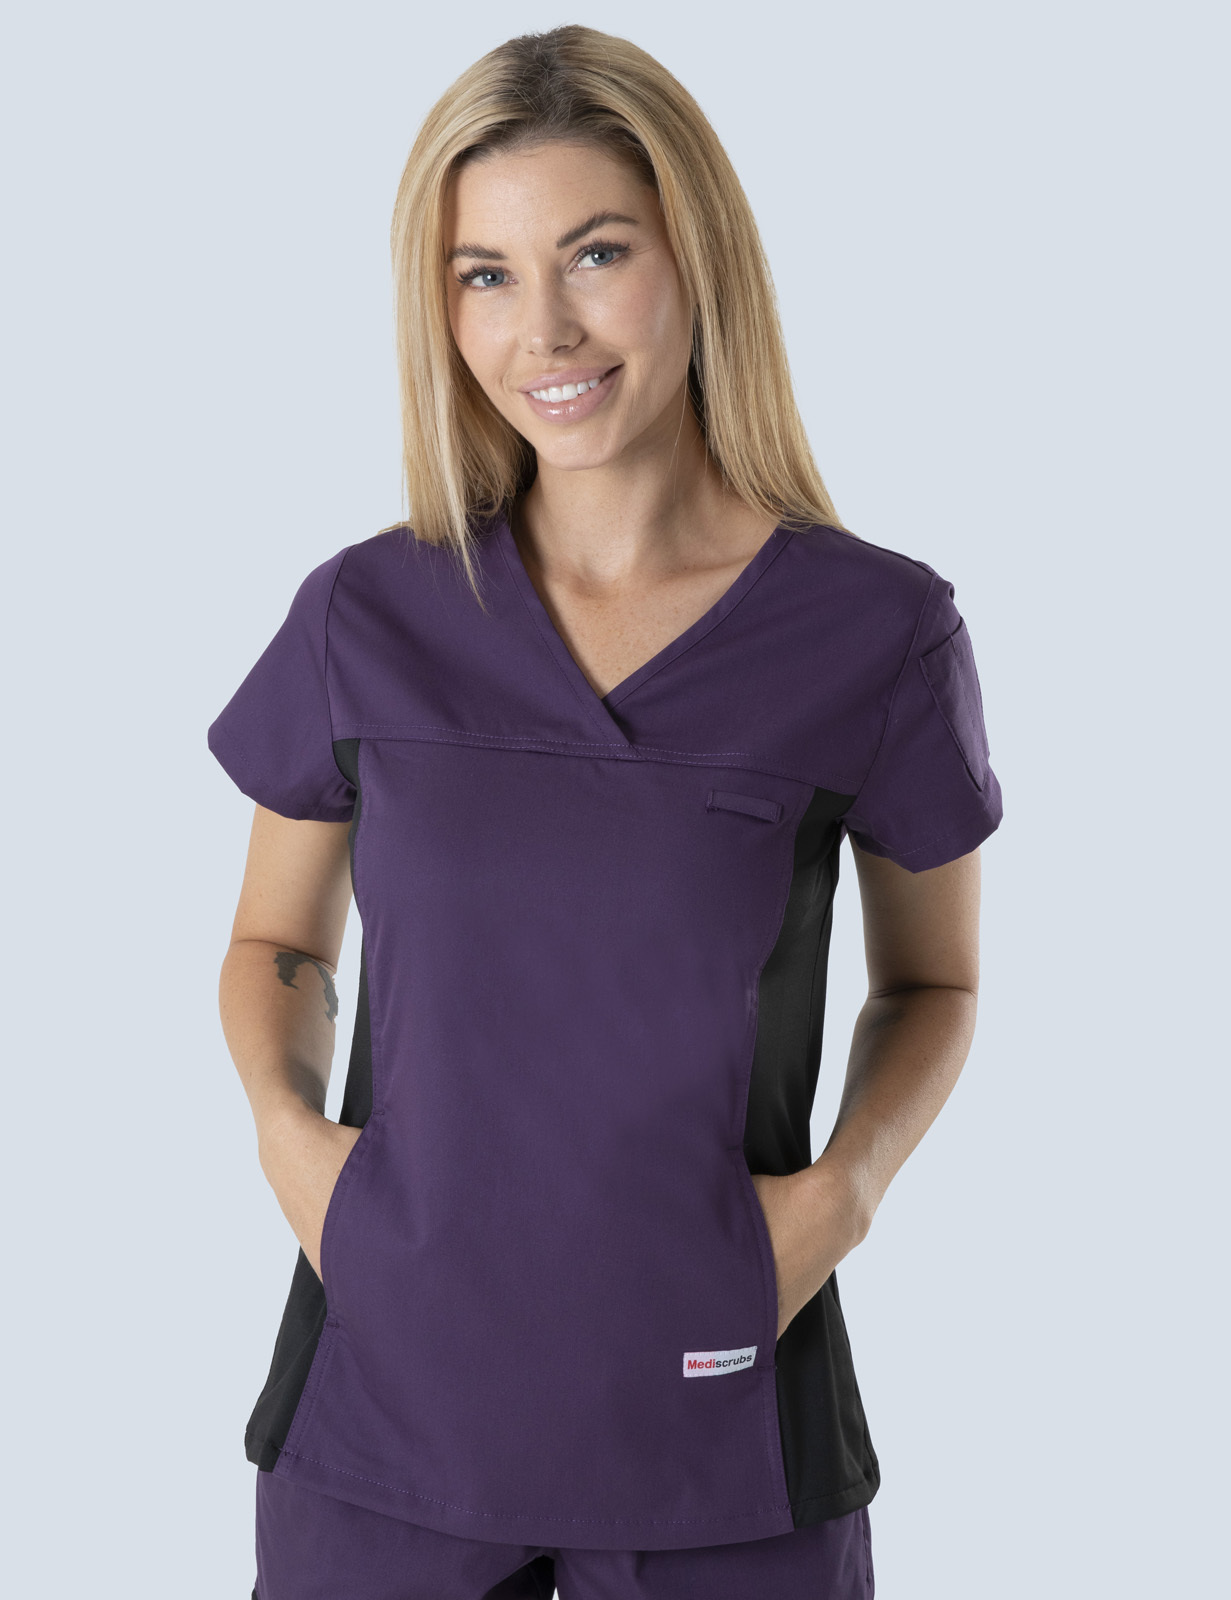 Ashmore Retreat Endorsed Enrolled Nurse Top Only Bundle (Women's Fit Spandex in Aubergine incl Logo) 